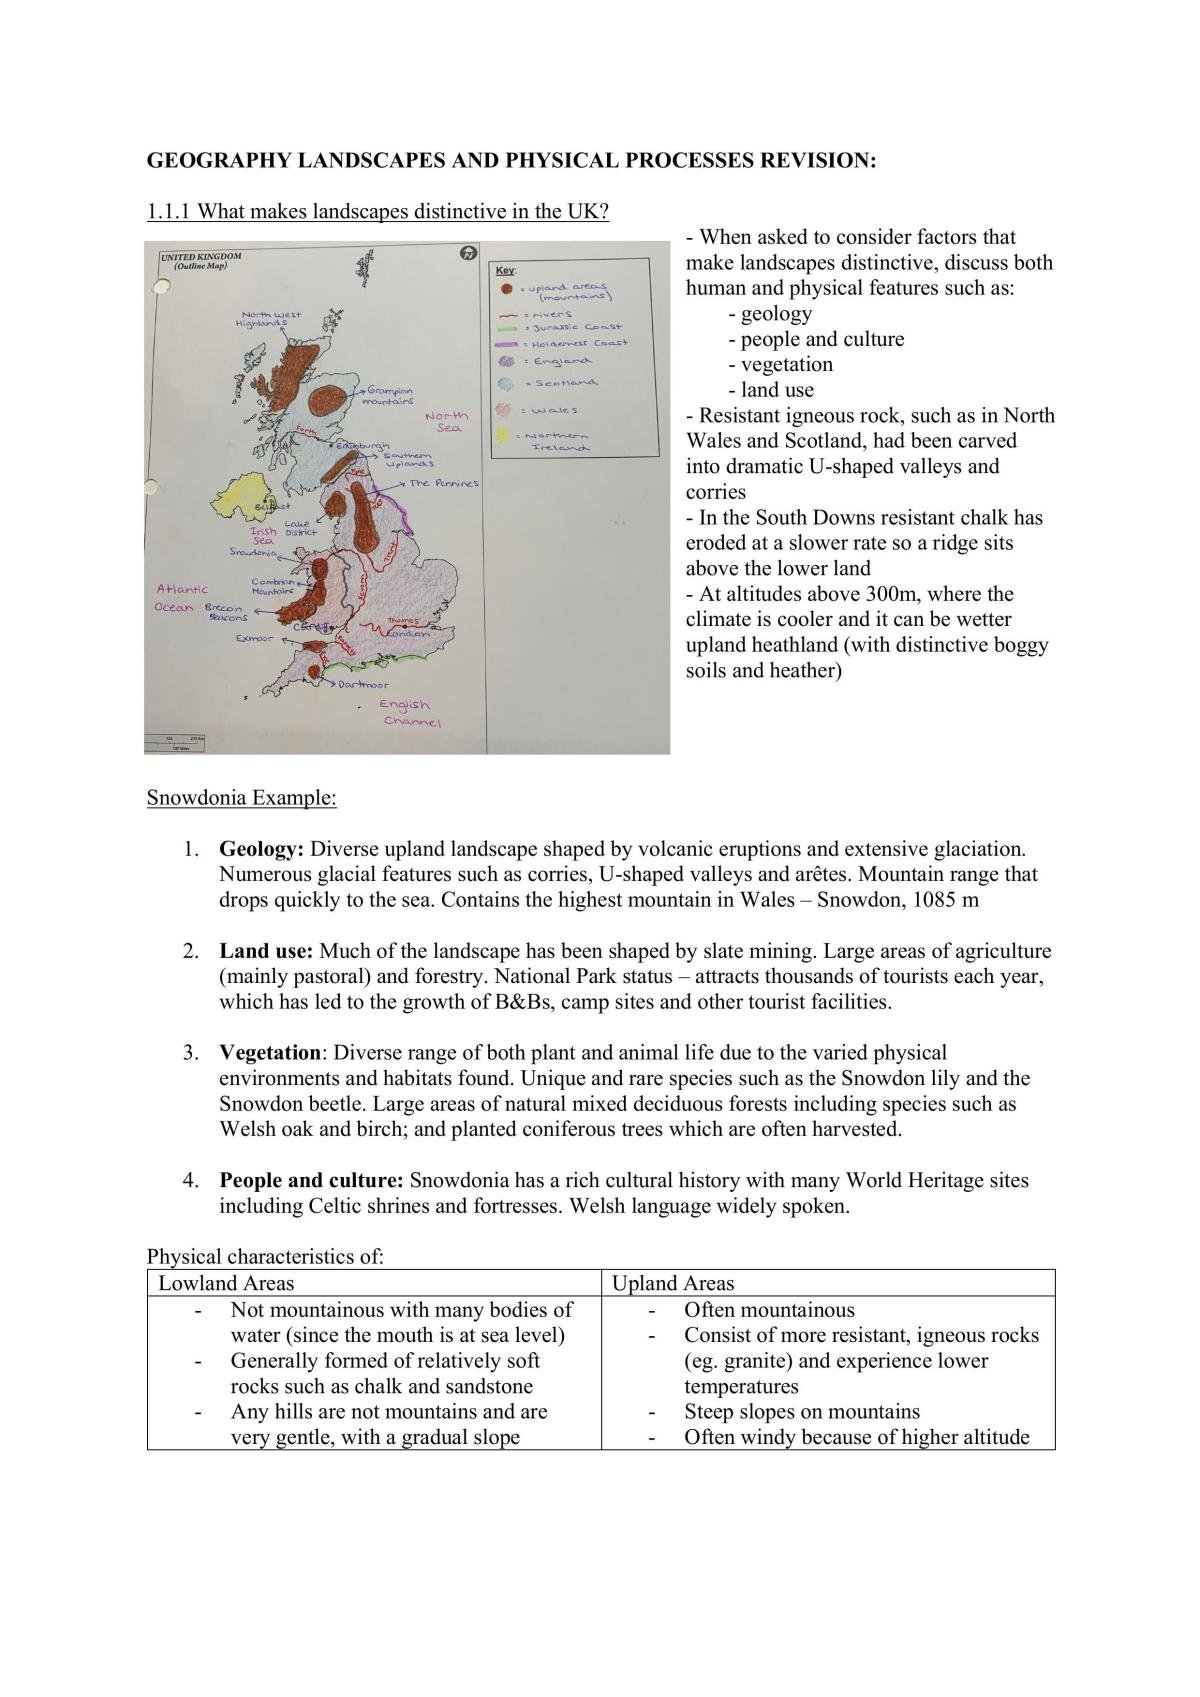 Geography Landscapes and Physical Processes Revision - Page 1